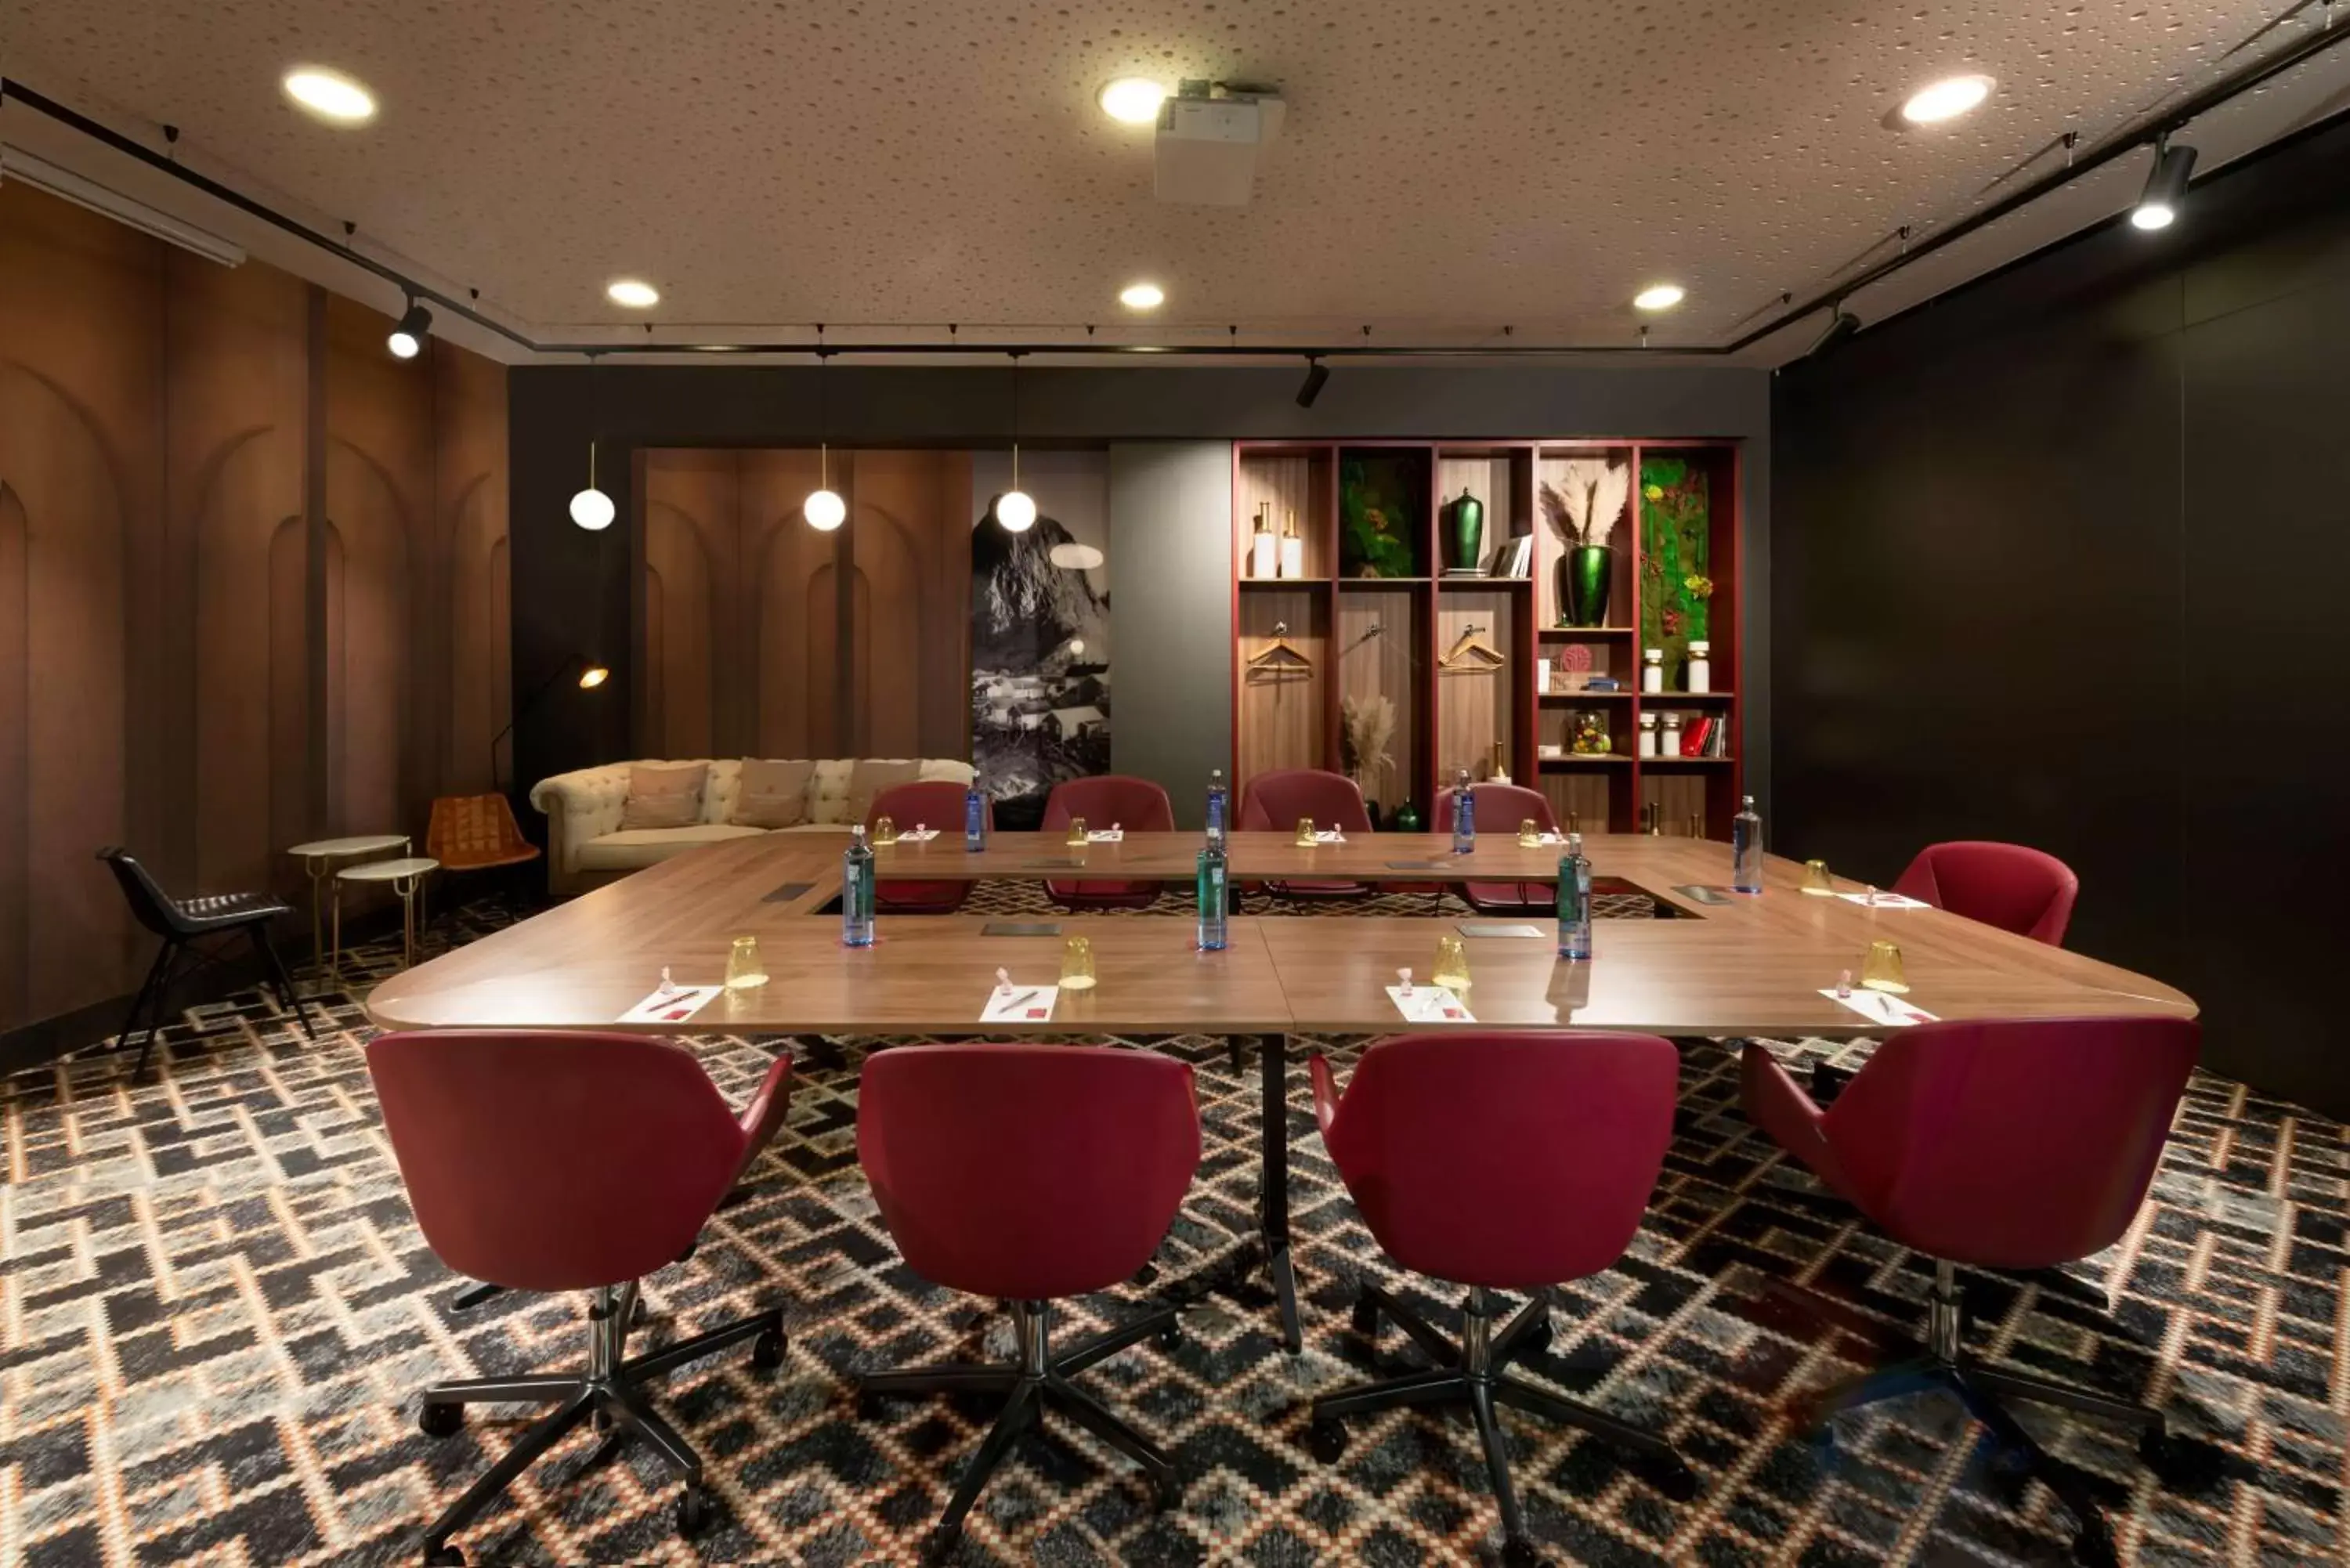 Meeting/conference room in NH Collection Madrid Suecia